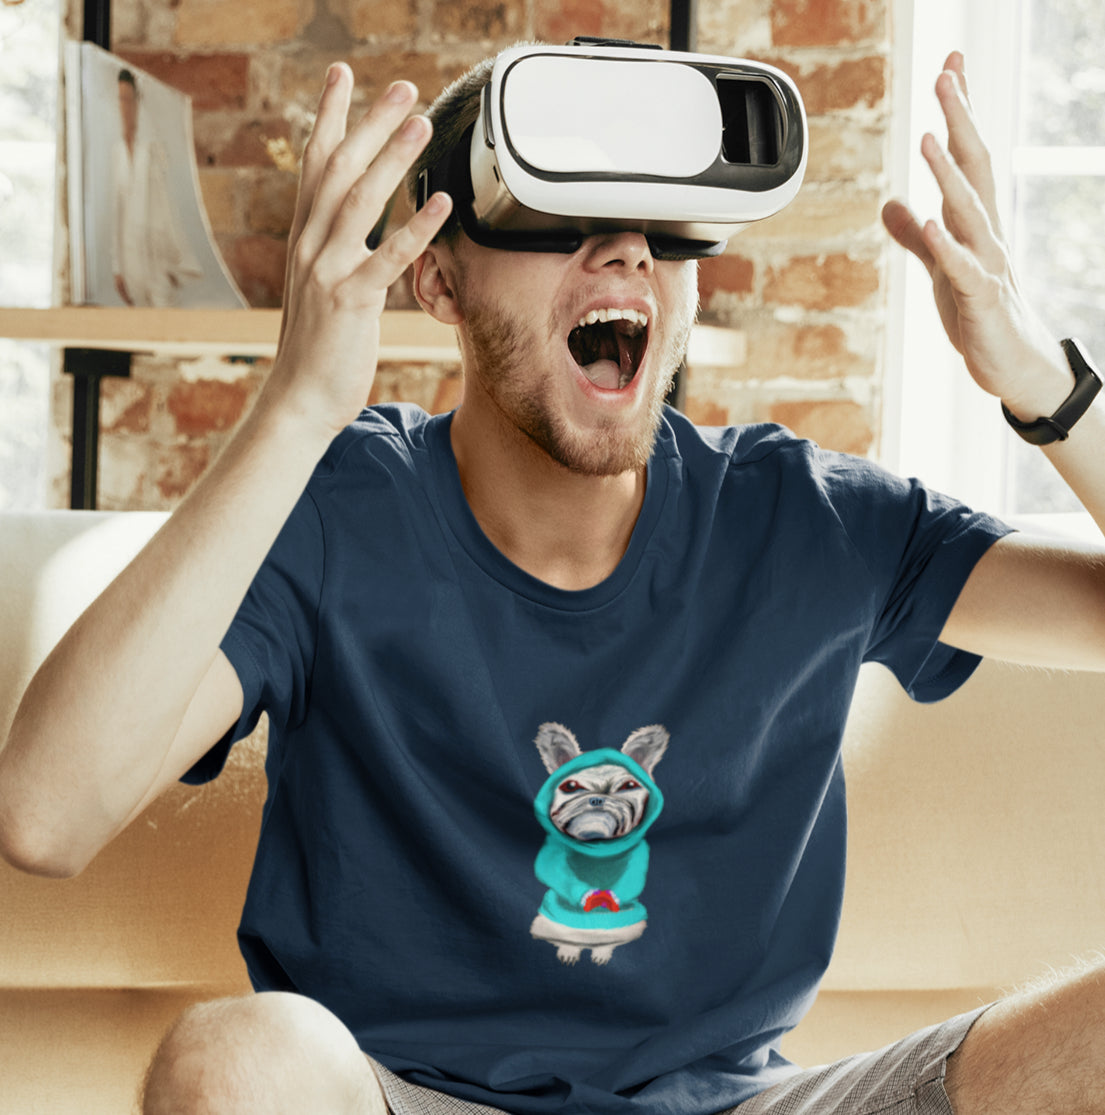 Dog Gamer | 100% Organic Cotton T Shirt worn by a man with vr headset